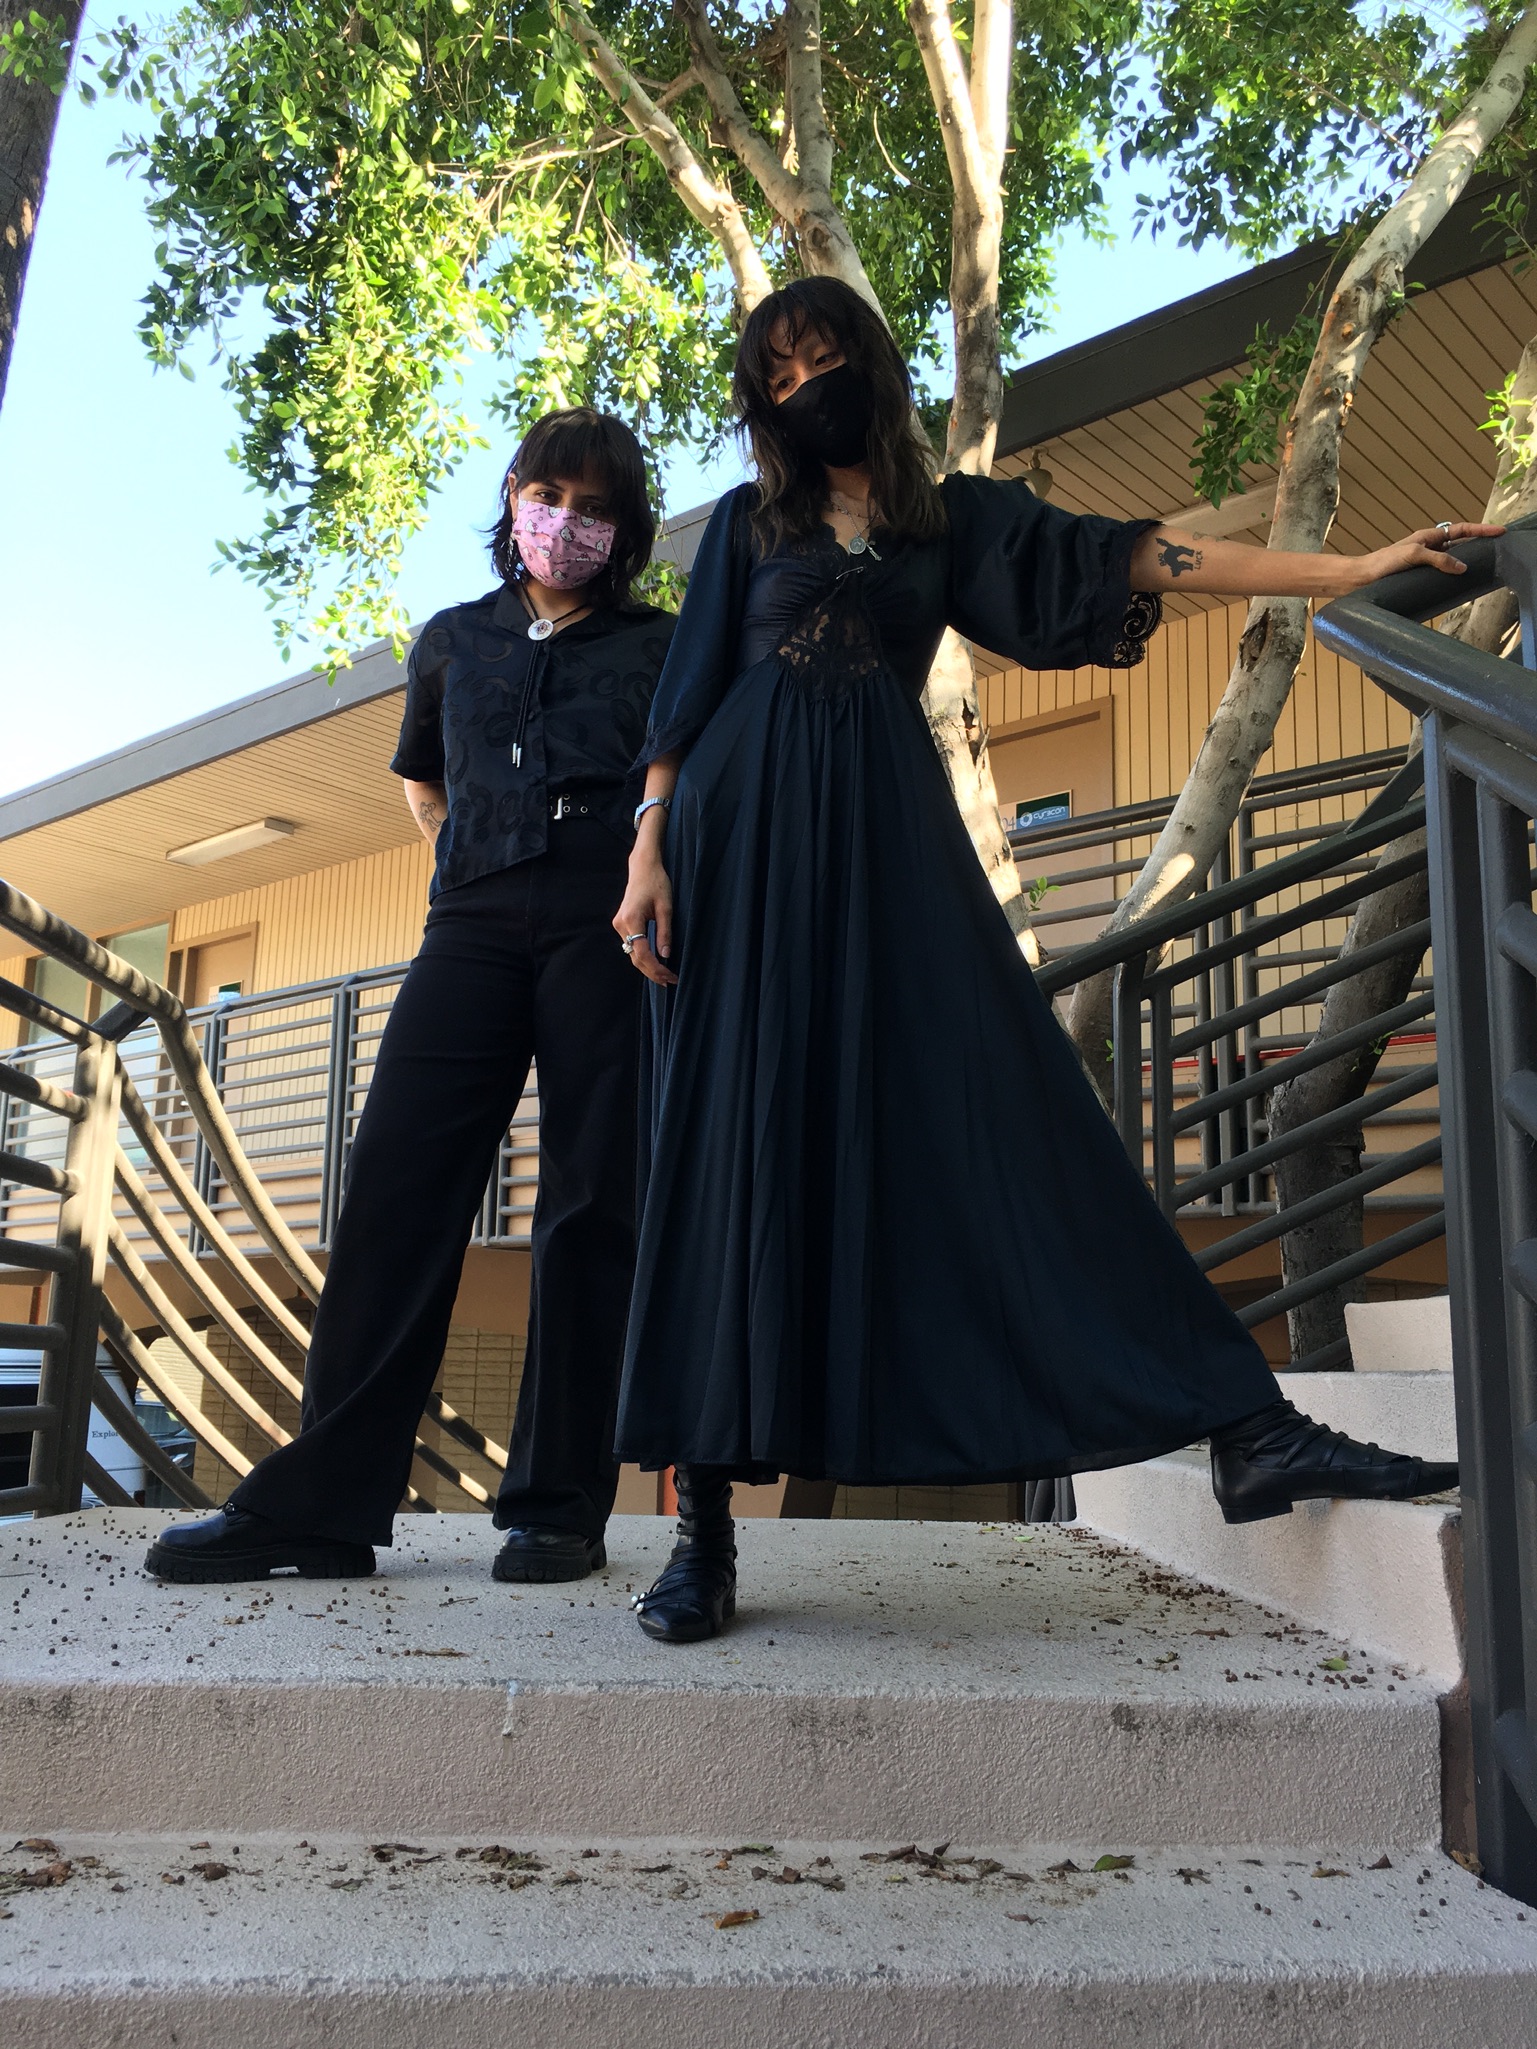 Two people standing at top of steps with tree in background wearing all black outfits